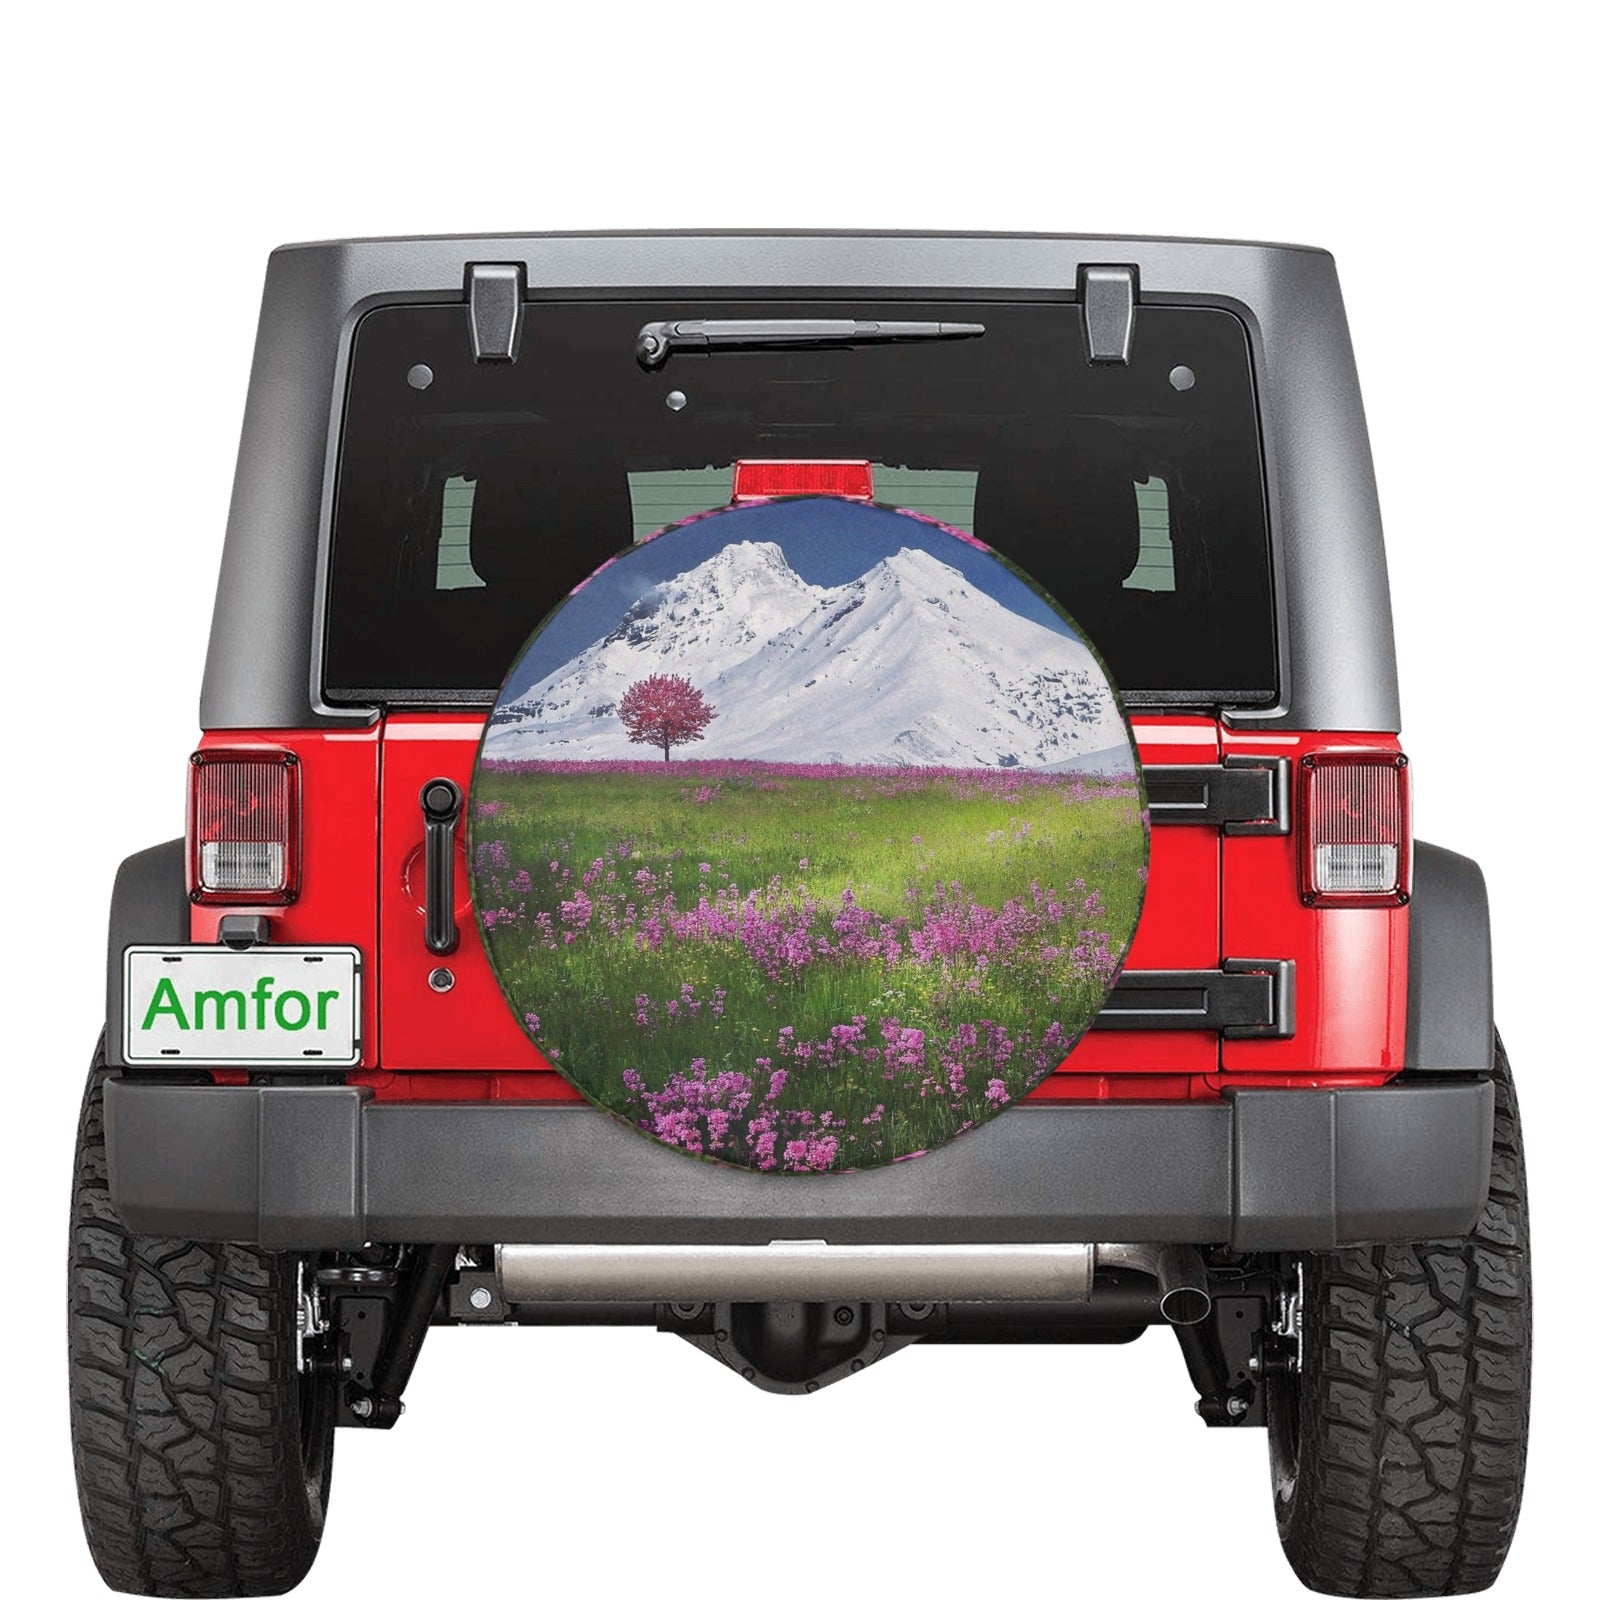 Mountains and Flowers Spare Tire Cover (Medium) (16")